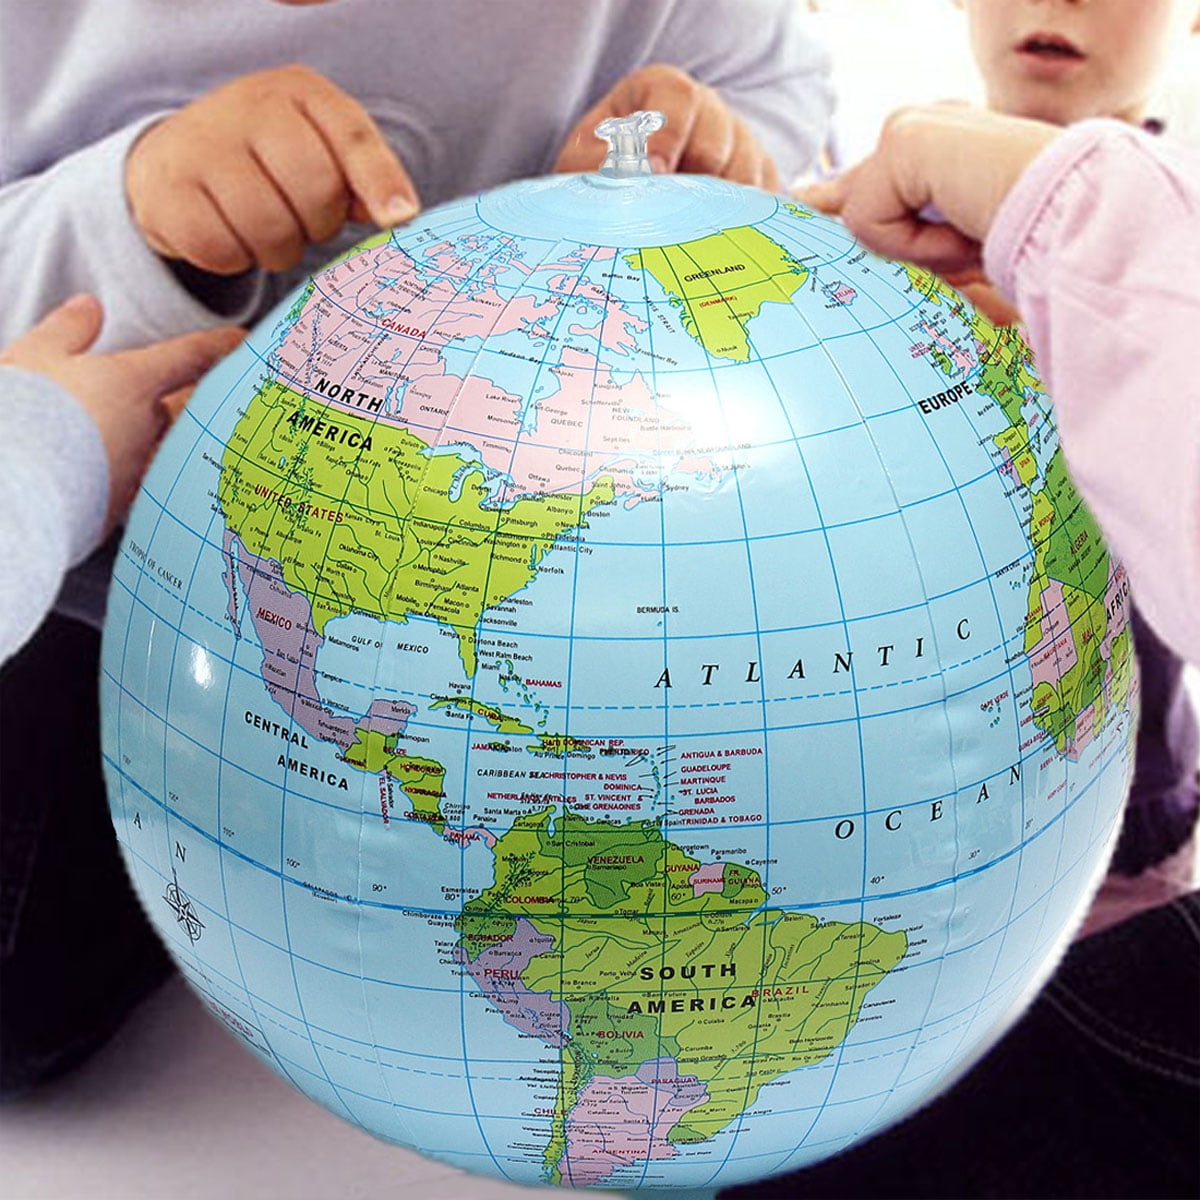 12/16 inches Inflatable Globe Map Ball World Earth Education Toy Geography J6B9 